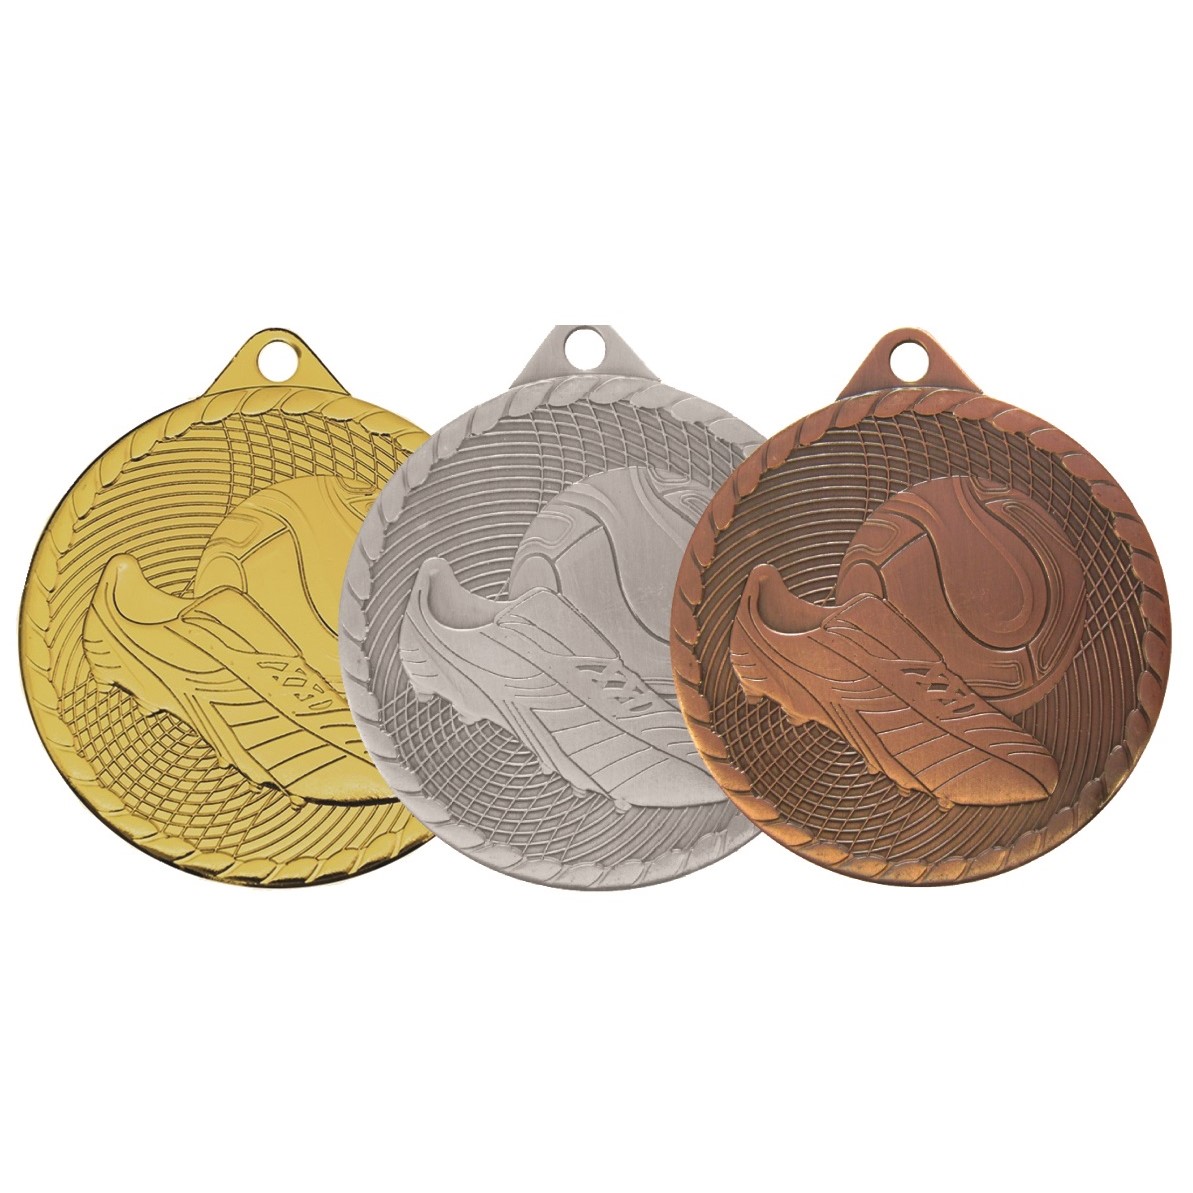 Isoline Economy Football Medal (size: 50mm) - 63851